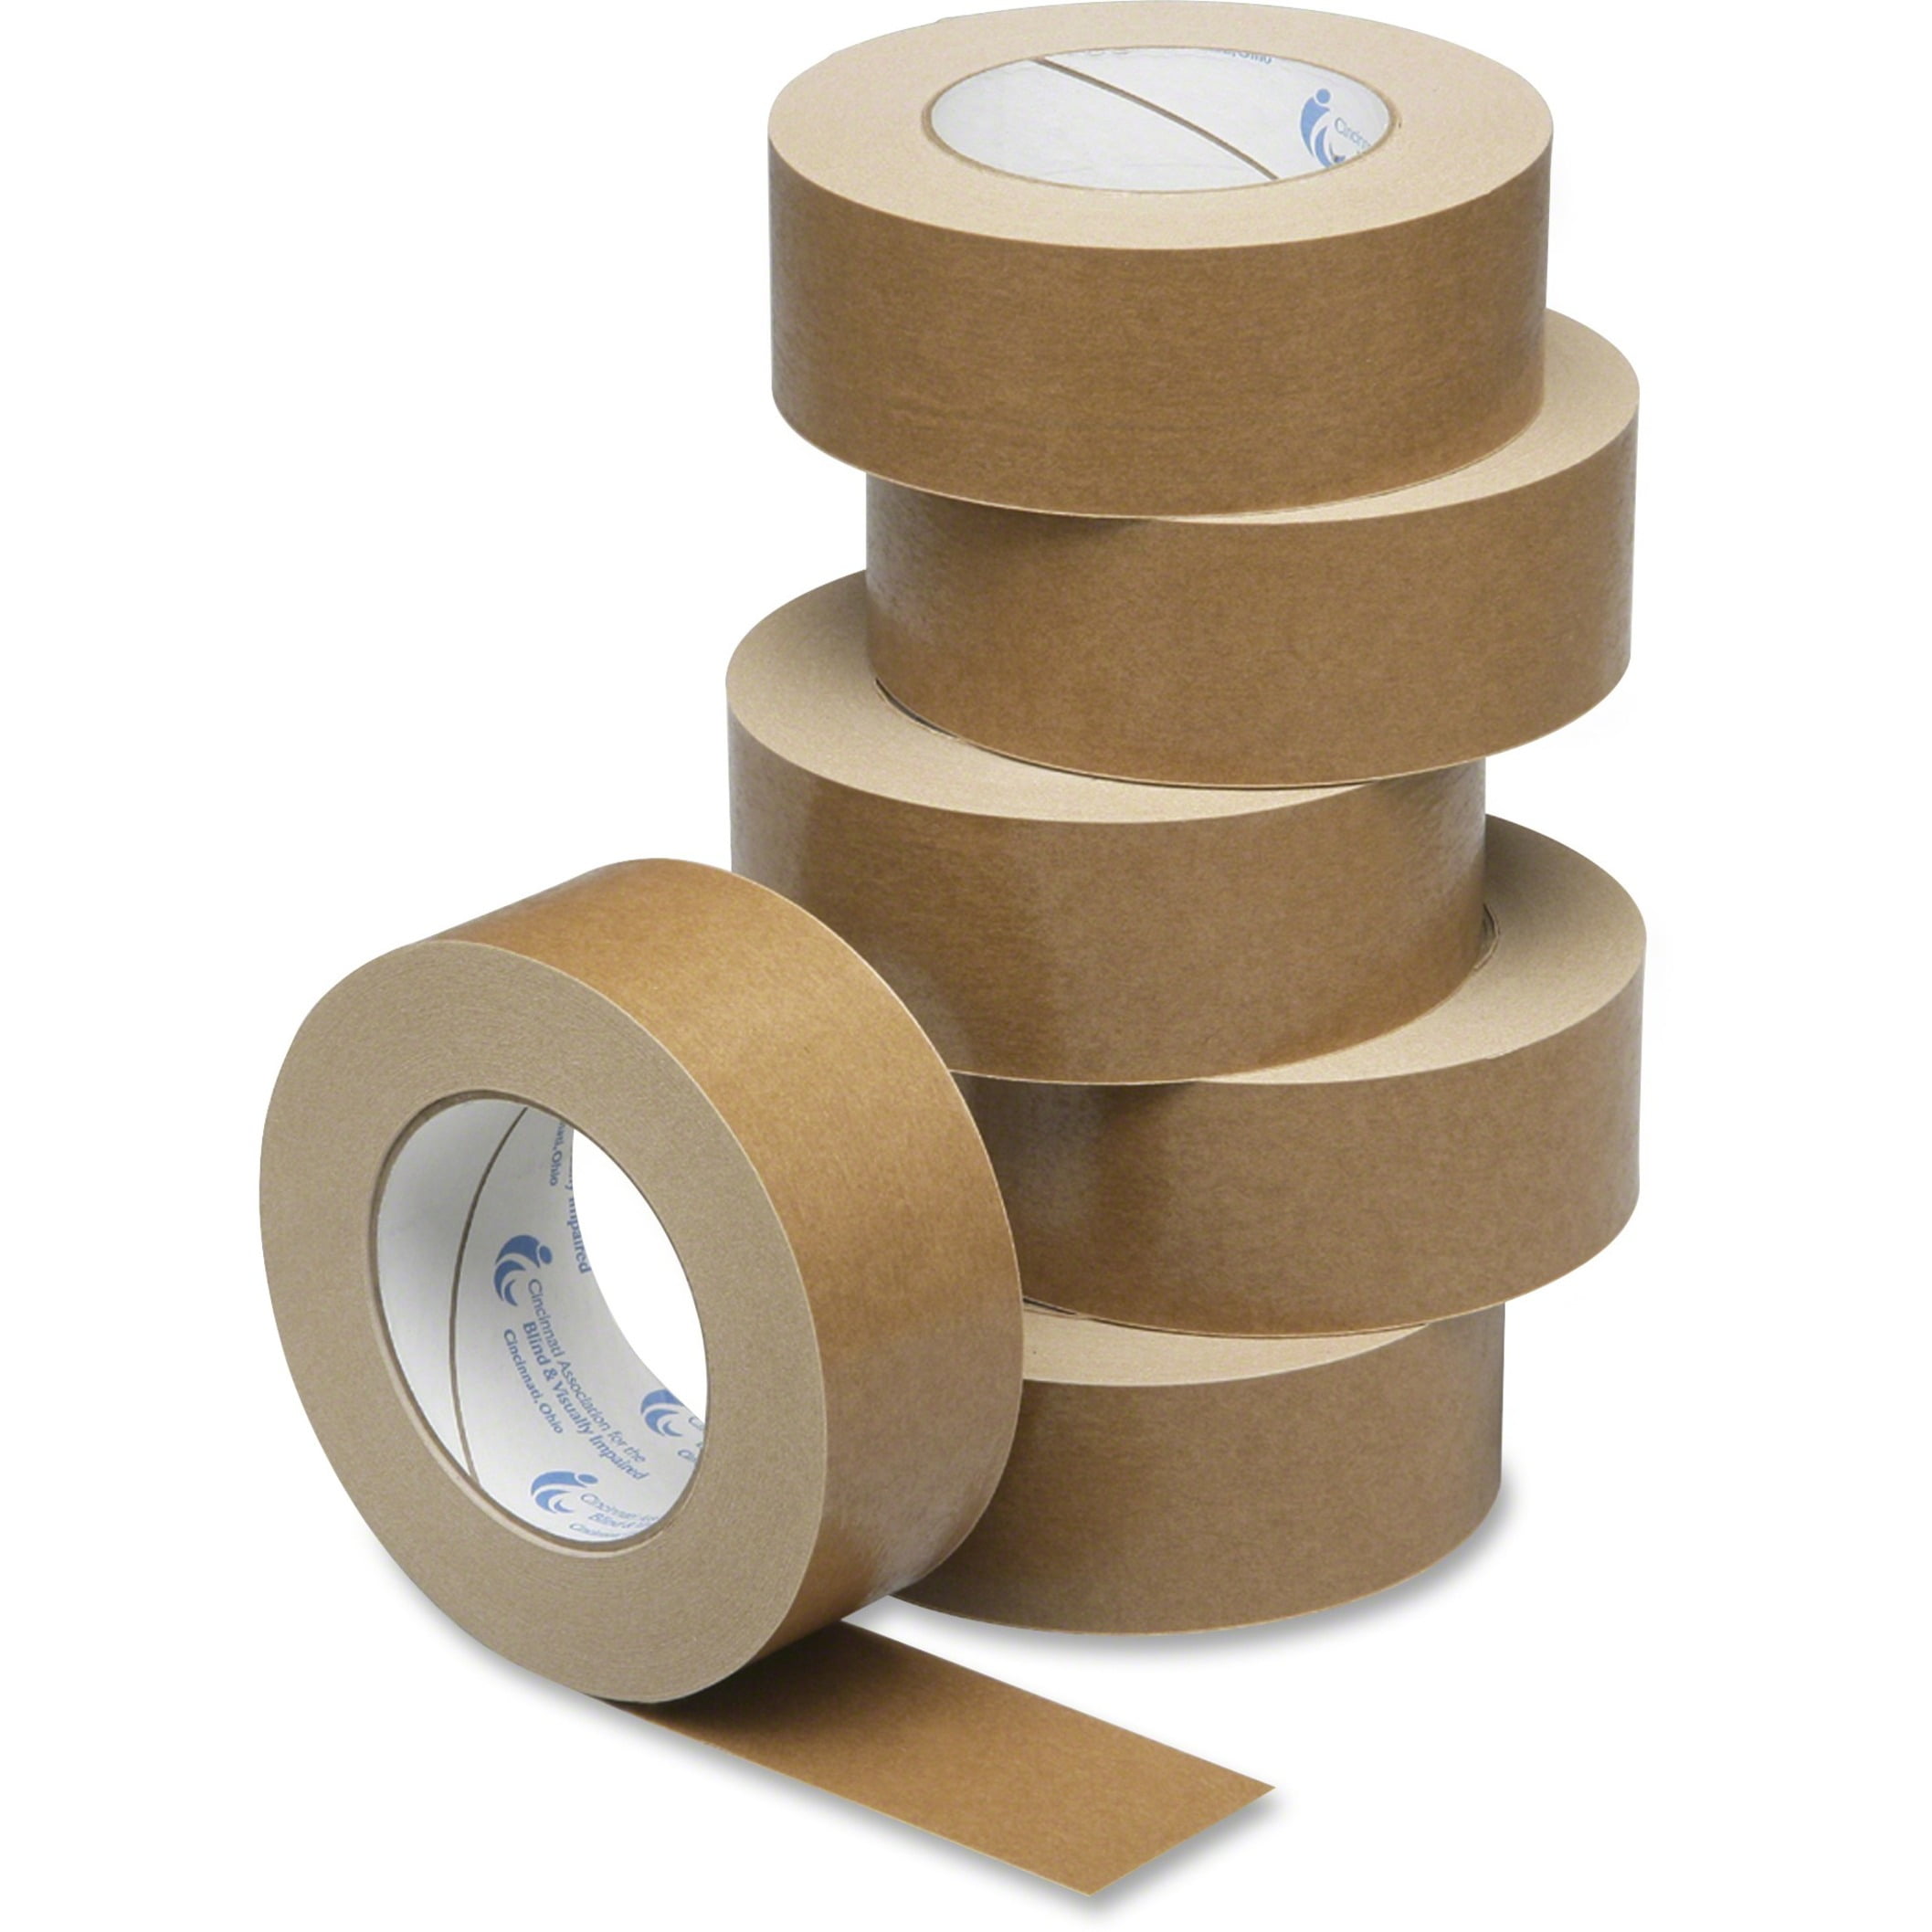 When plain just doesn't cut it, roll out the creativity with Scotch®  Masking Tape!